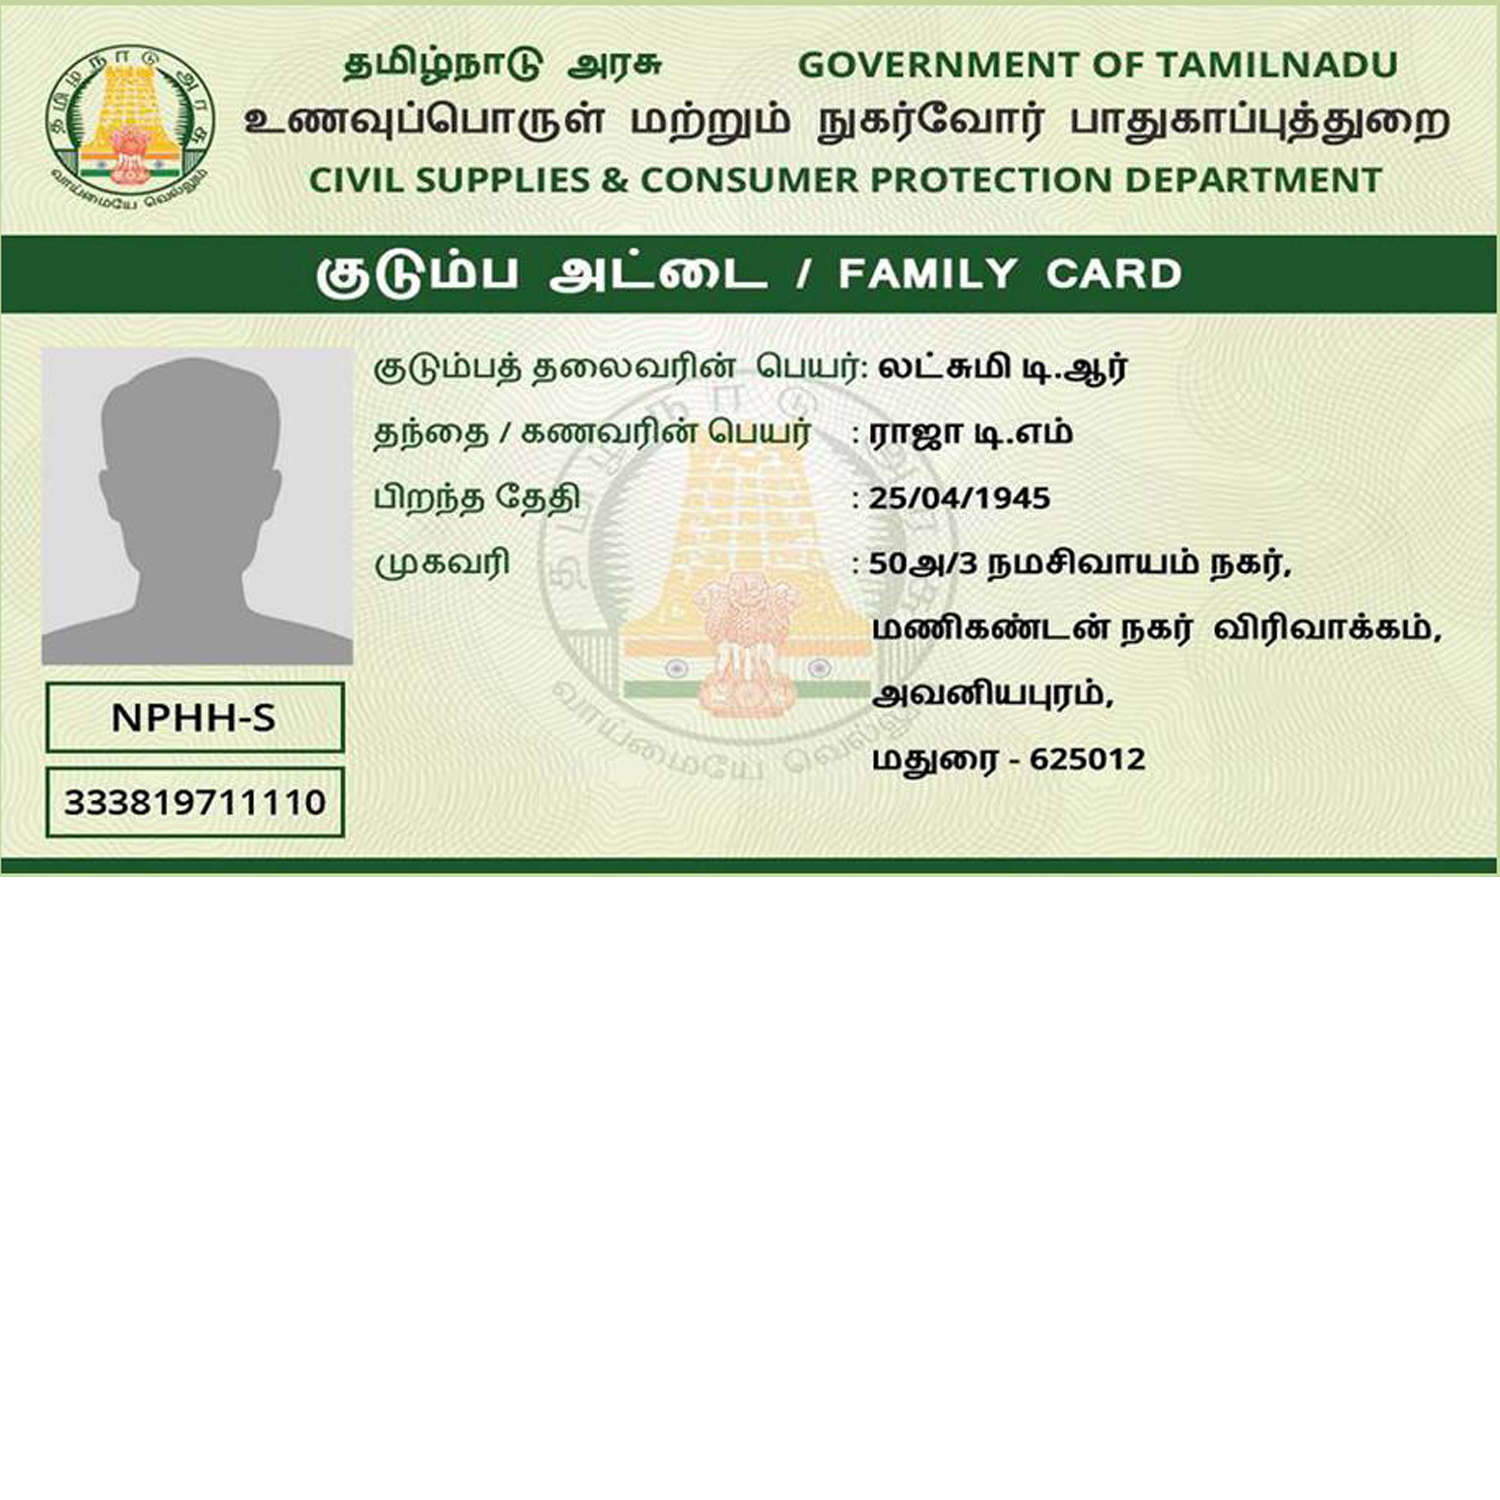 Breaking News!! Central government extension for ration card holders!